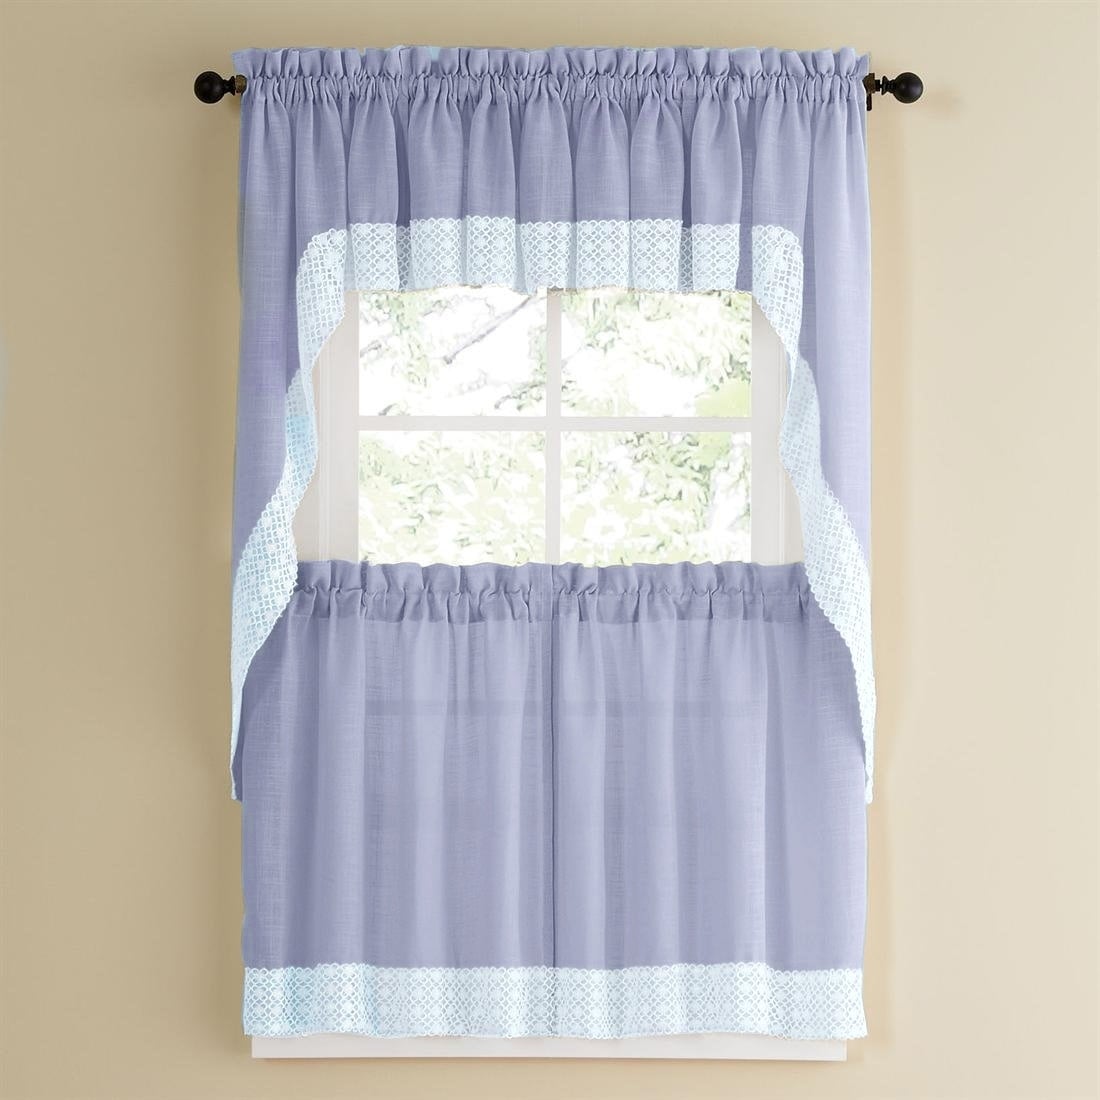 Blue Country Style Kitchen Curtains With White Daisy Lace Accent